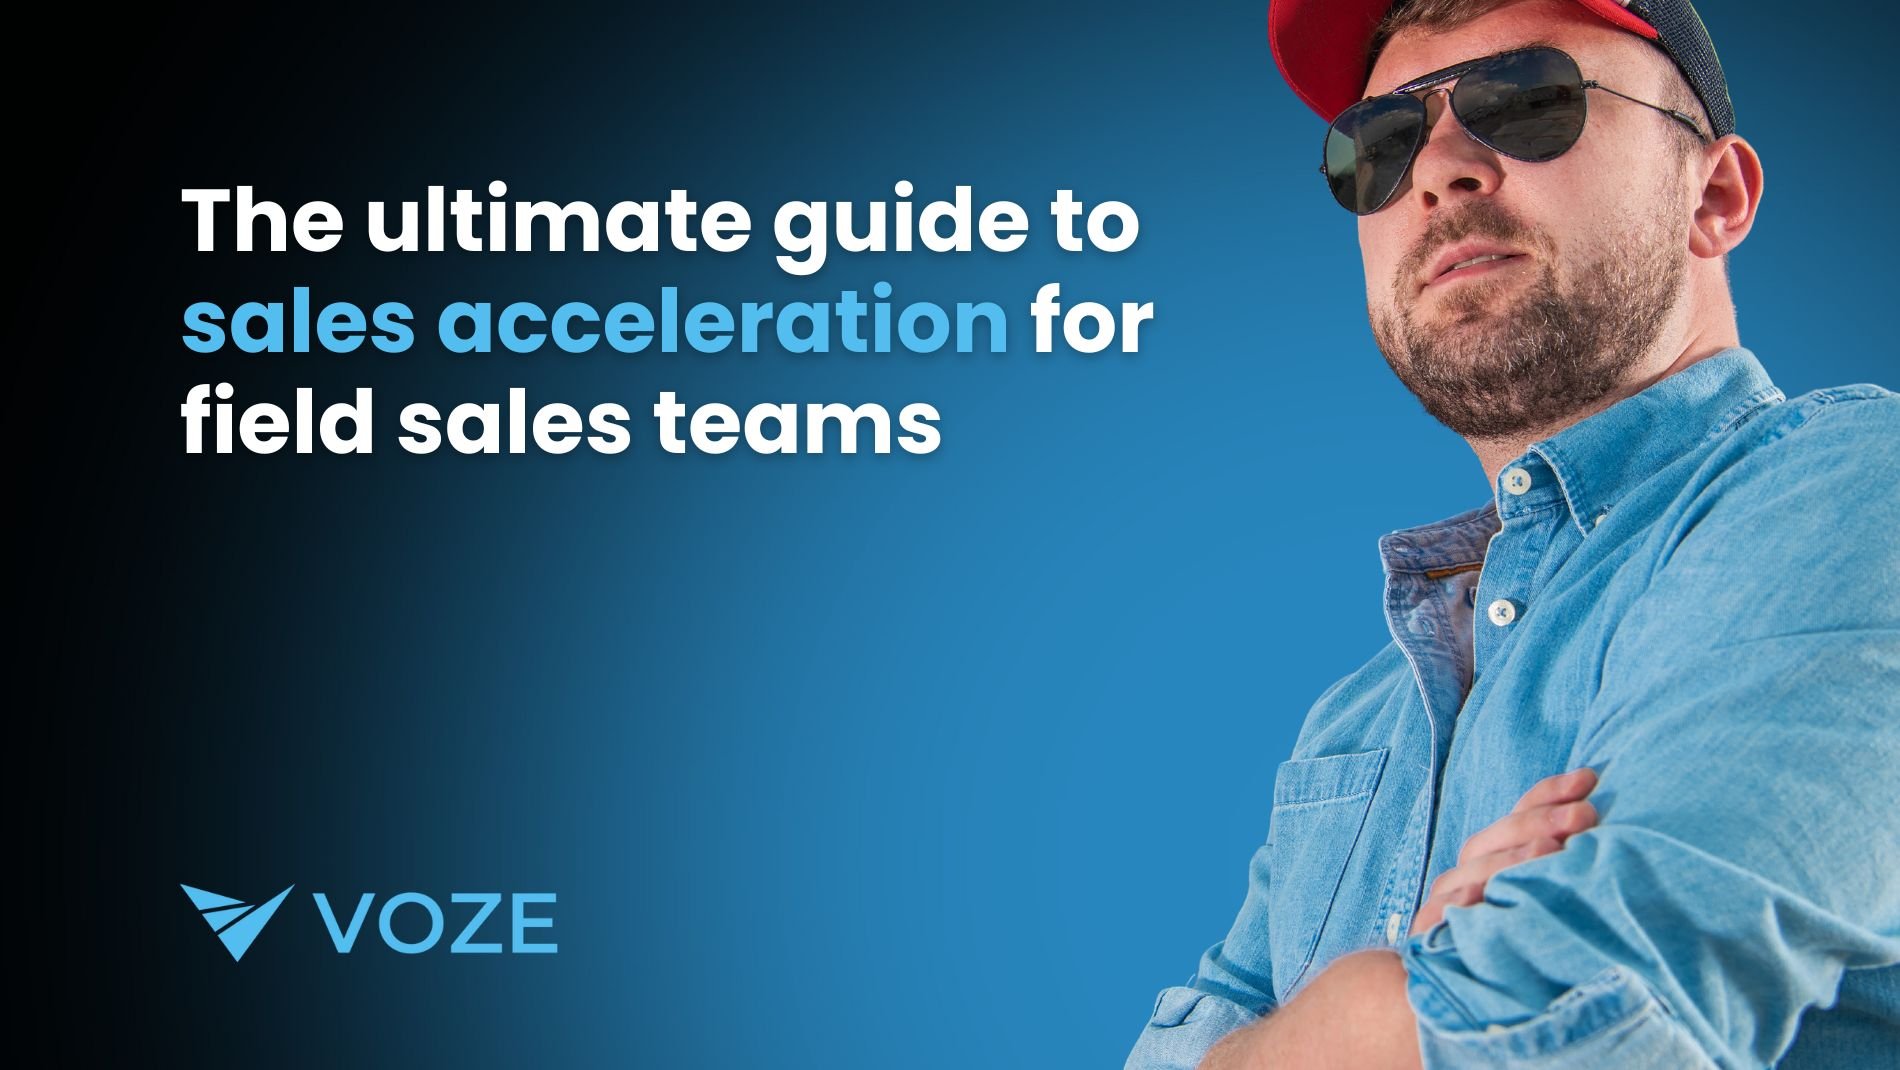 The ultimate guide to sales acceleration for field sales teams